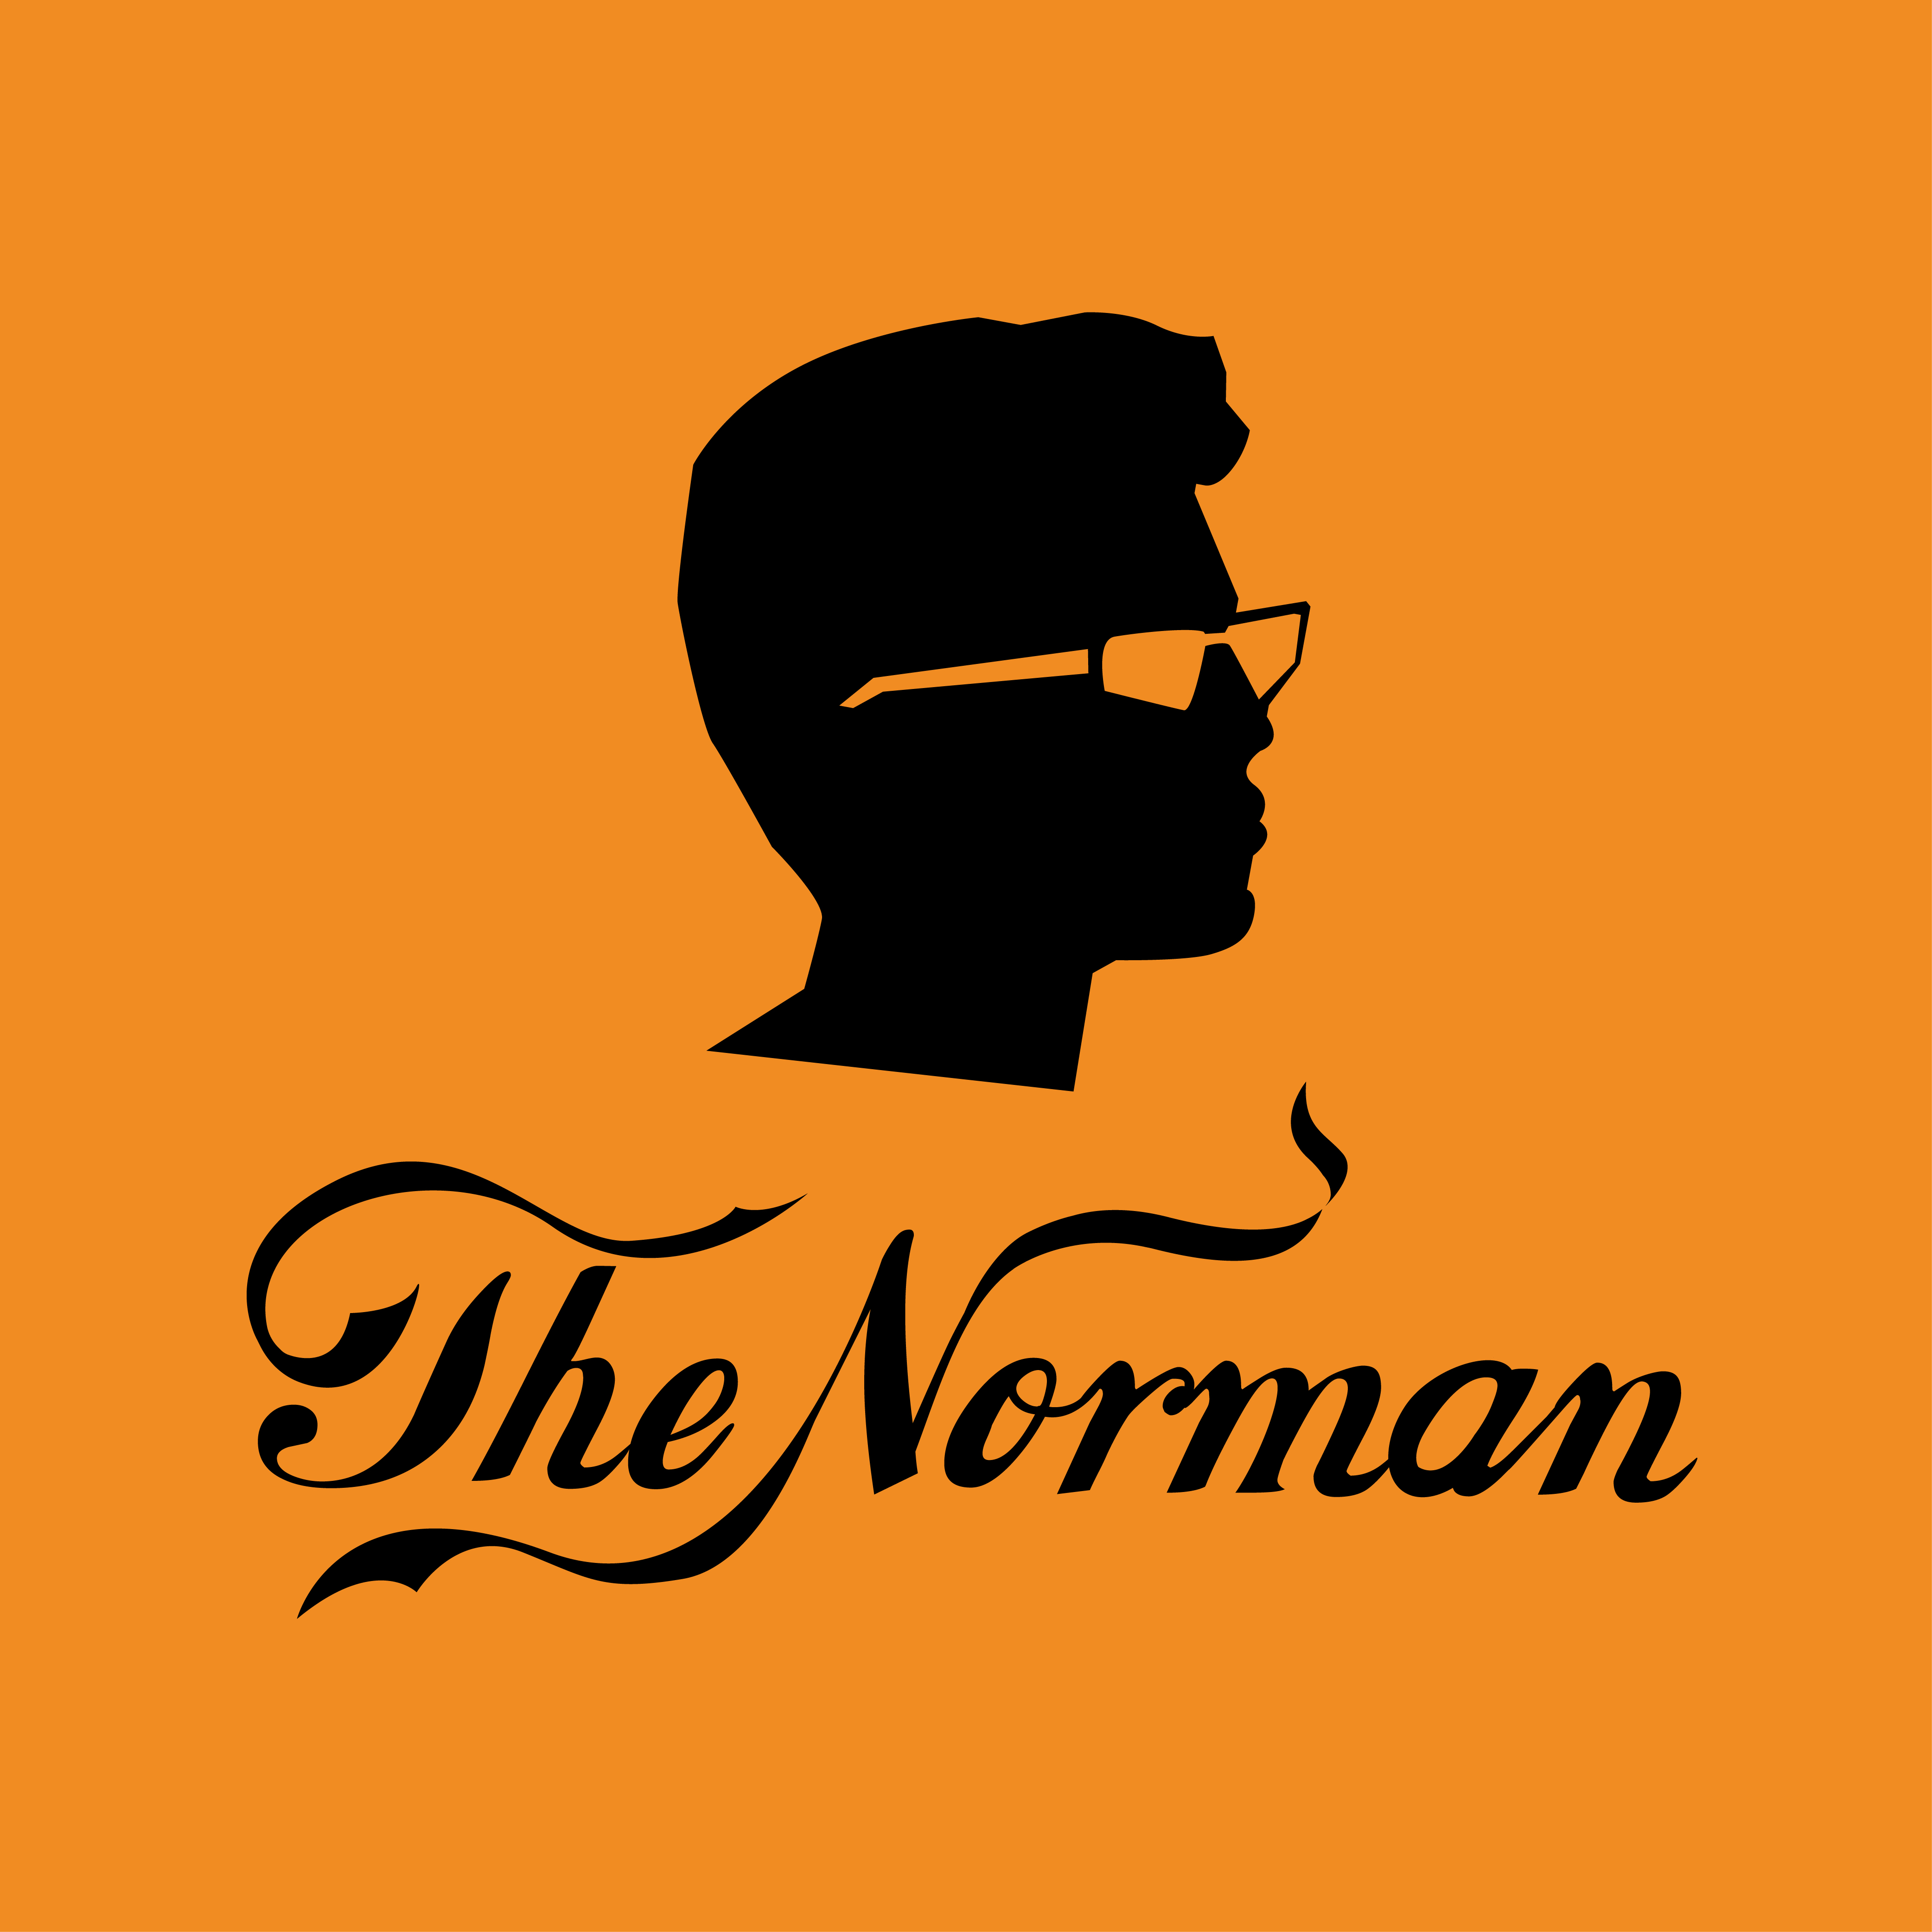 The Norman